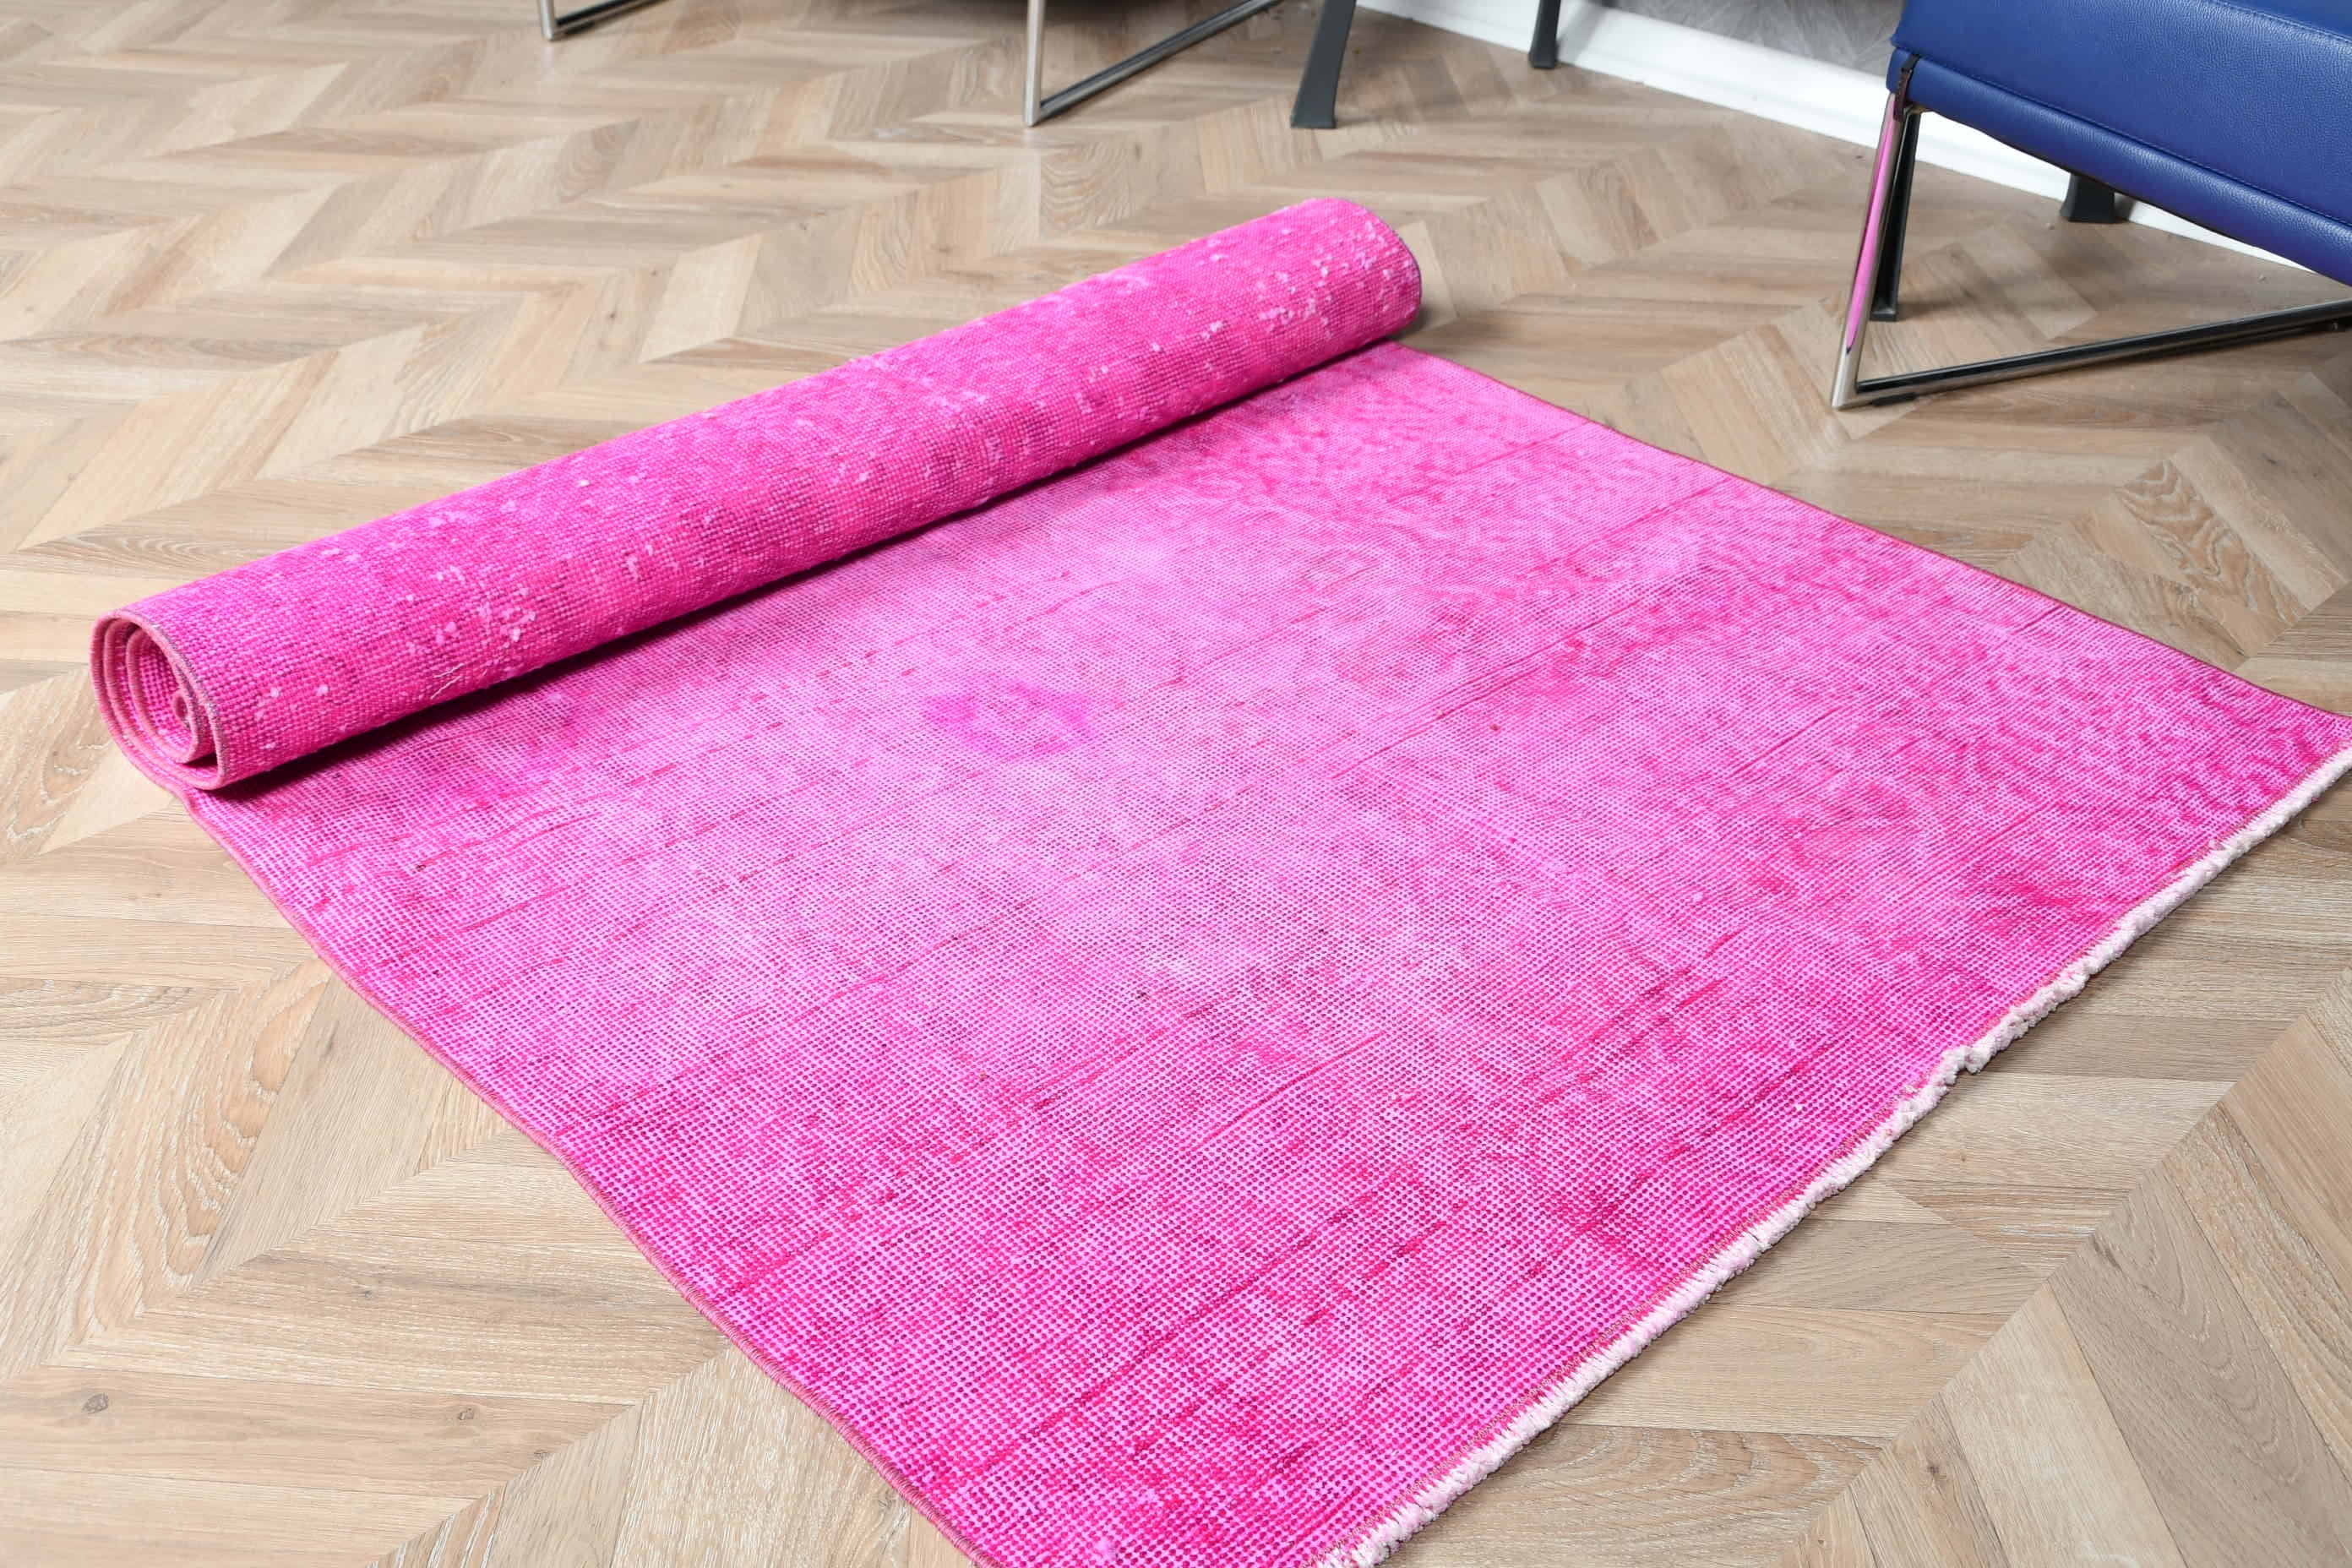 Entry Rugs, Kitchen Rug, Organic Rug, Anatolian Rug, Moroccan Rugs, Pink  3.6x6.5 ft Accent Rug, Turkish Rugs, Vintage Rug